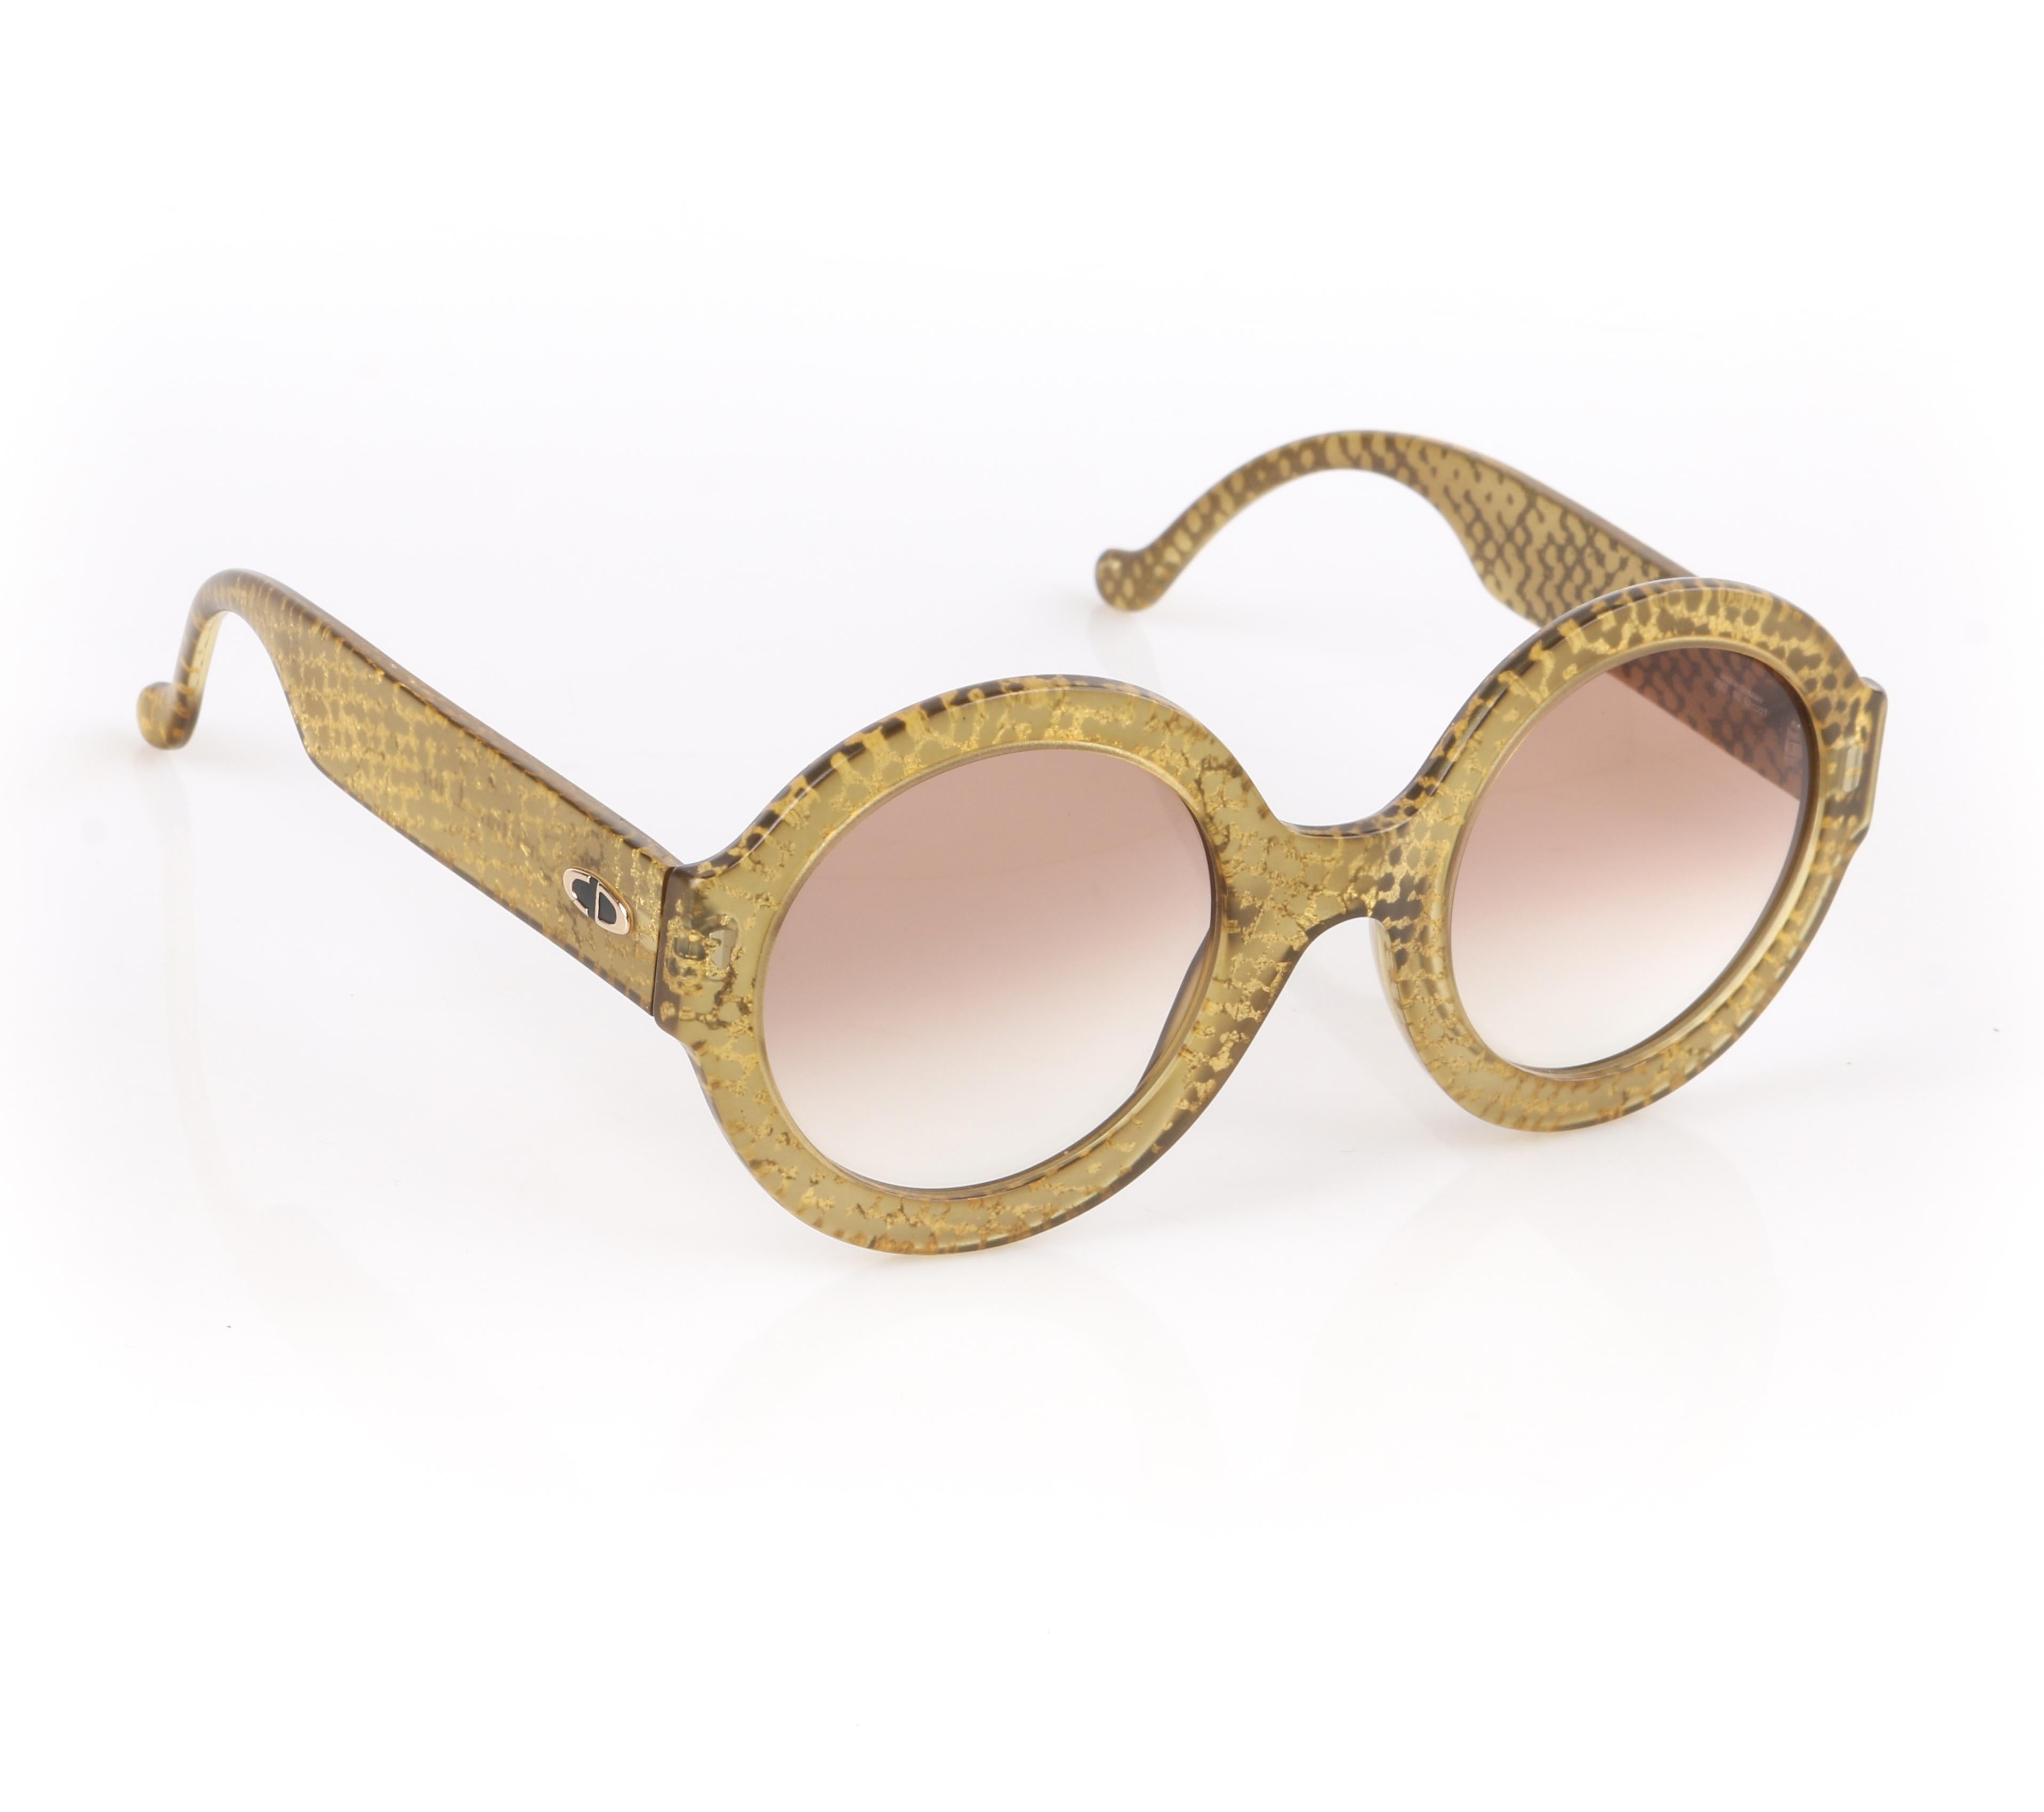 DESCRIPTION: CHRISTIAN DIOR S/S 1992 Translucent Gold Dot Round Optyl Frame Sunglasses 2567
 
Brand / Manufacturer: Christian Dior
Collection: Spring / Summer 1992 Designed by Gianfranco Ferré
Style: Round frame sunglasses
Color(s): Shades of gold,